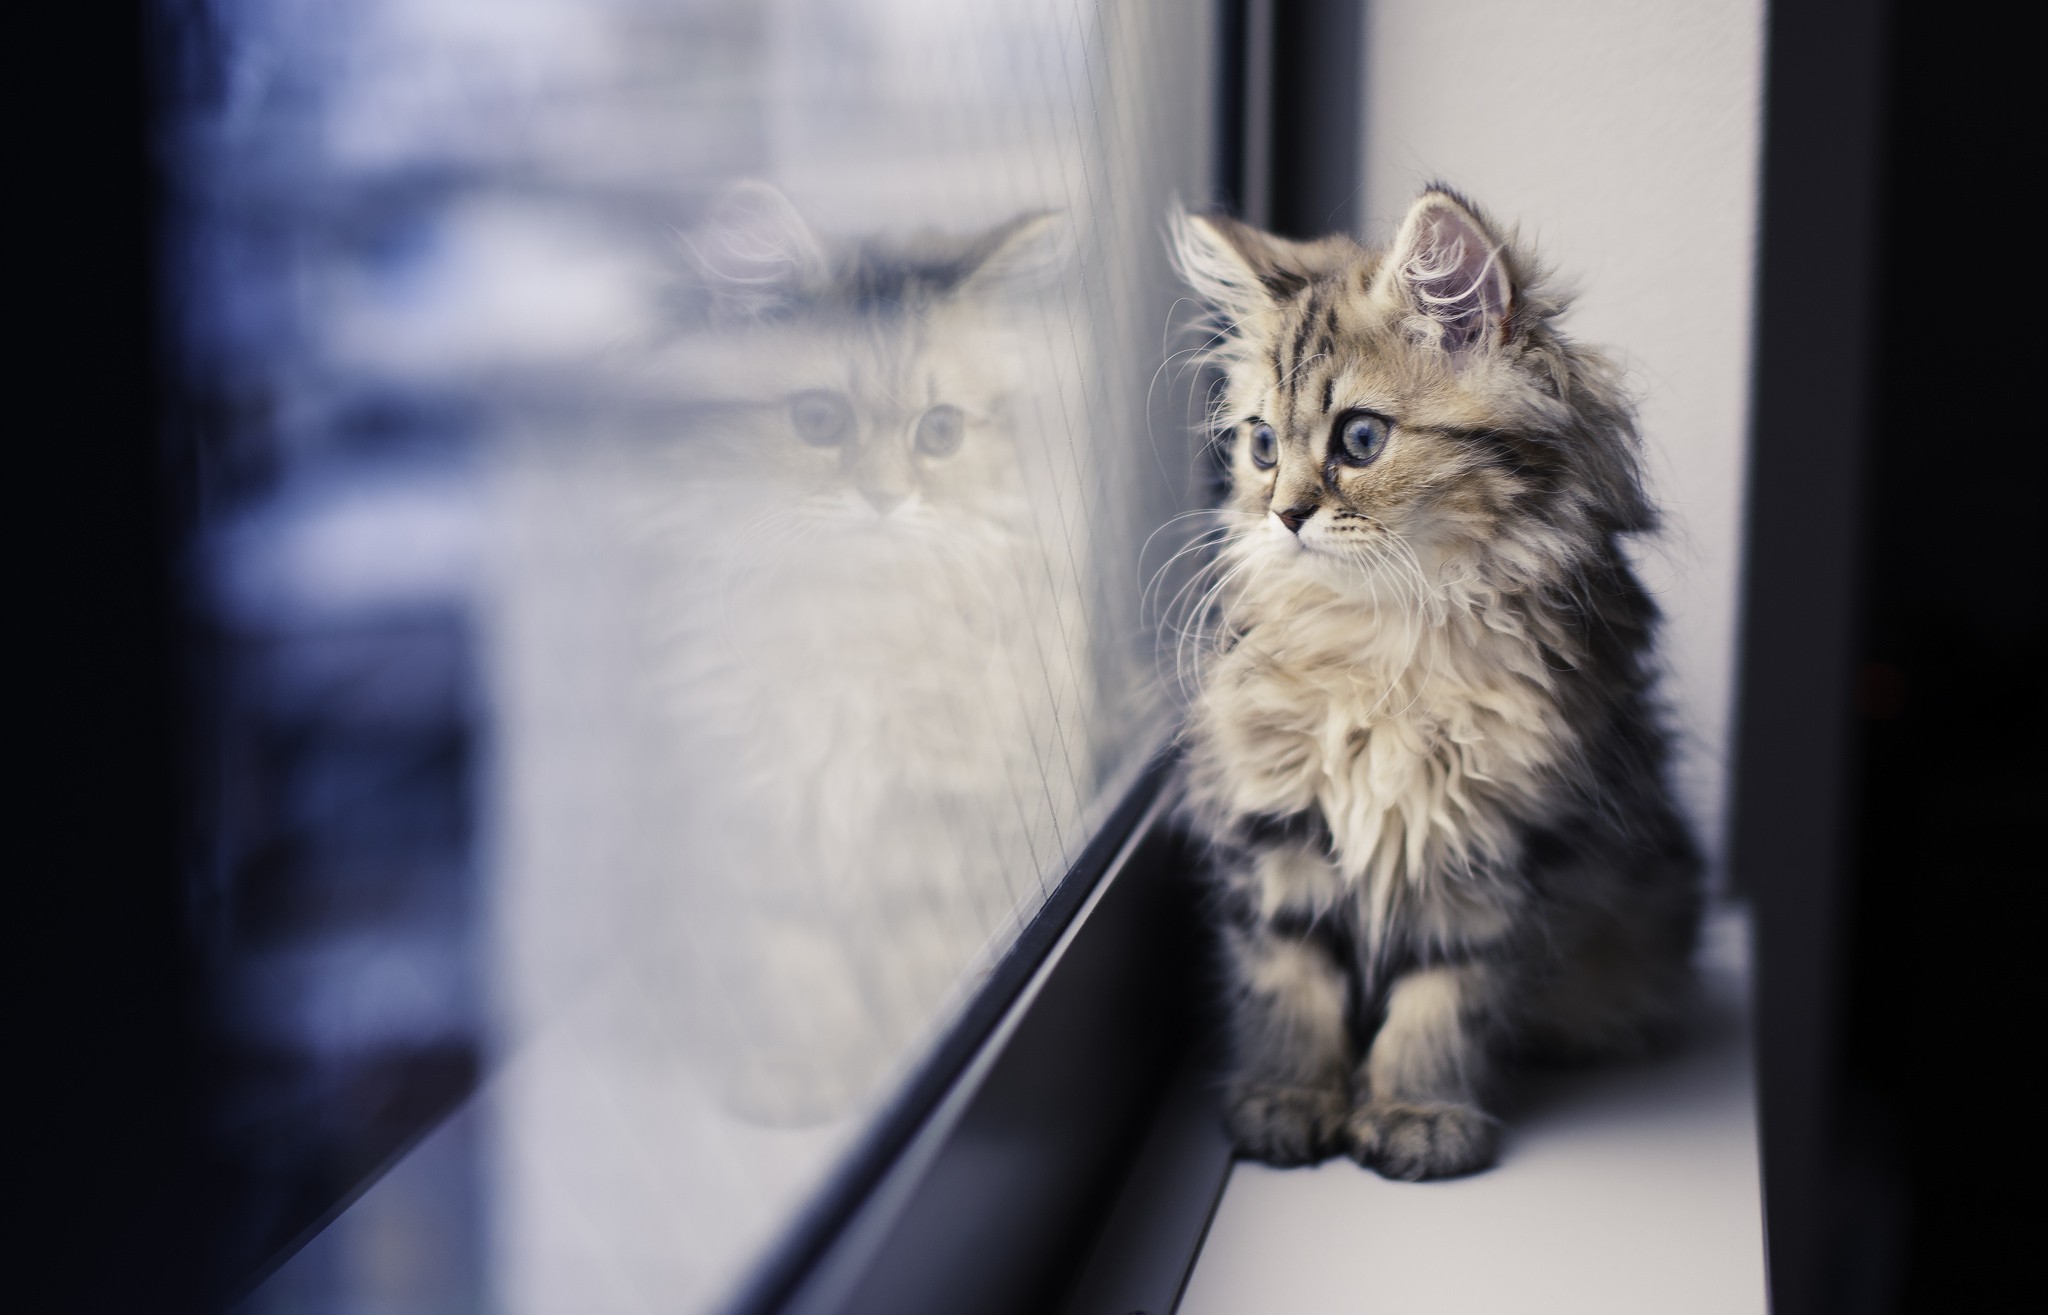 Cats Window Reflection Paws By The Window 2048x1315